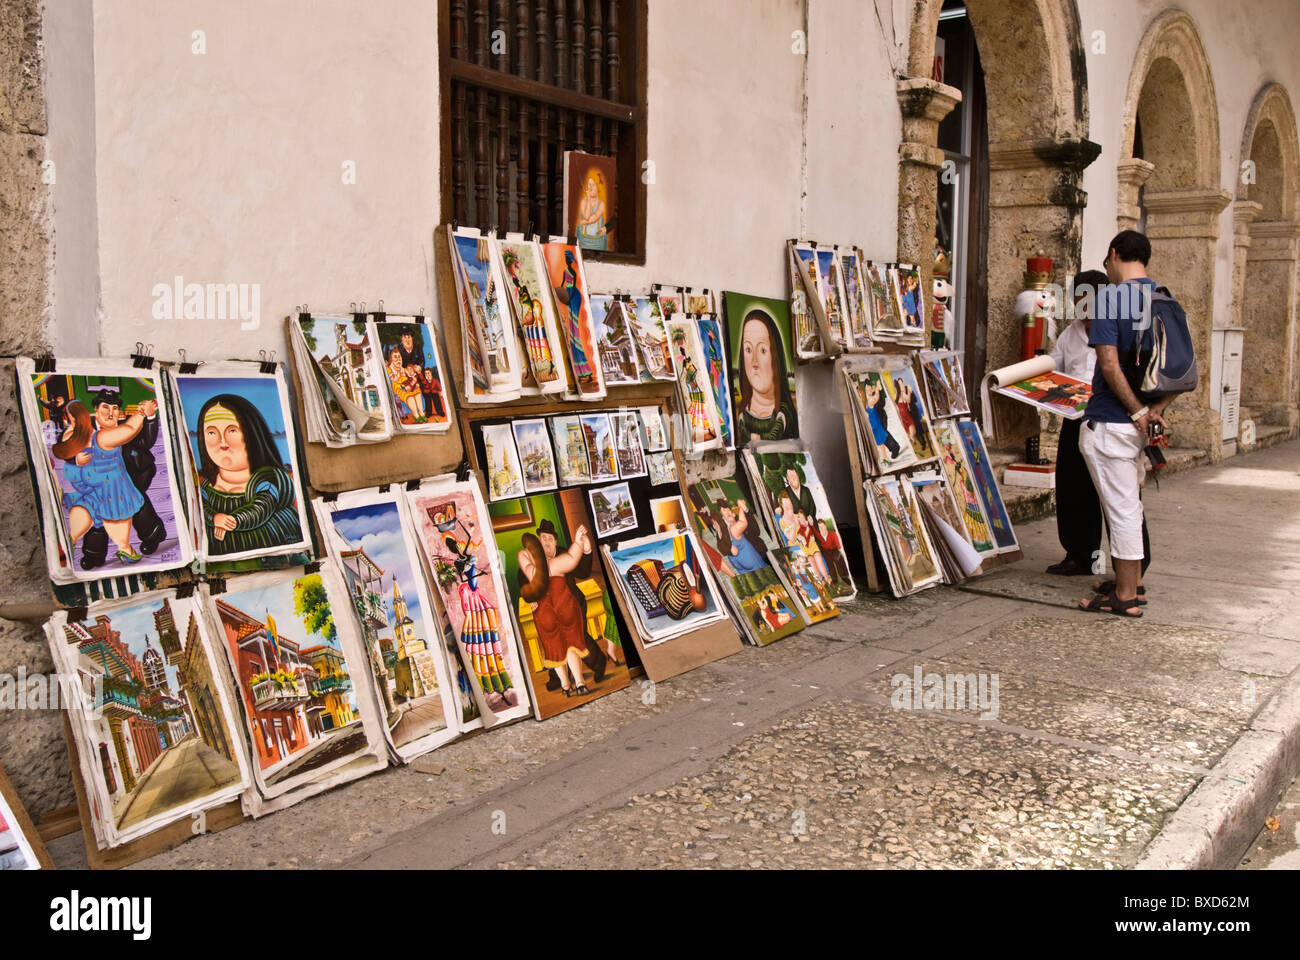 A street vendor shows his collection of local art to a tourist, Old Town, Cartagena de Indias, Colombia Stock Photo